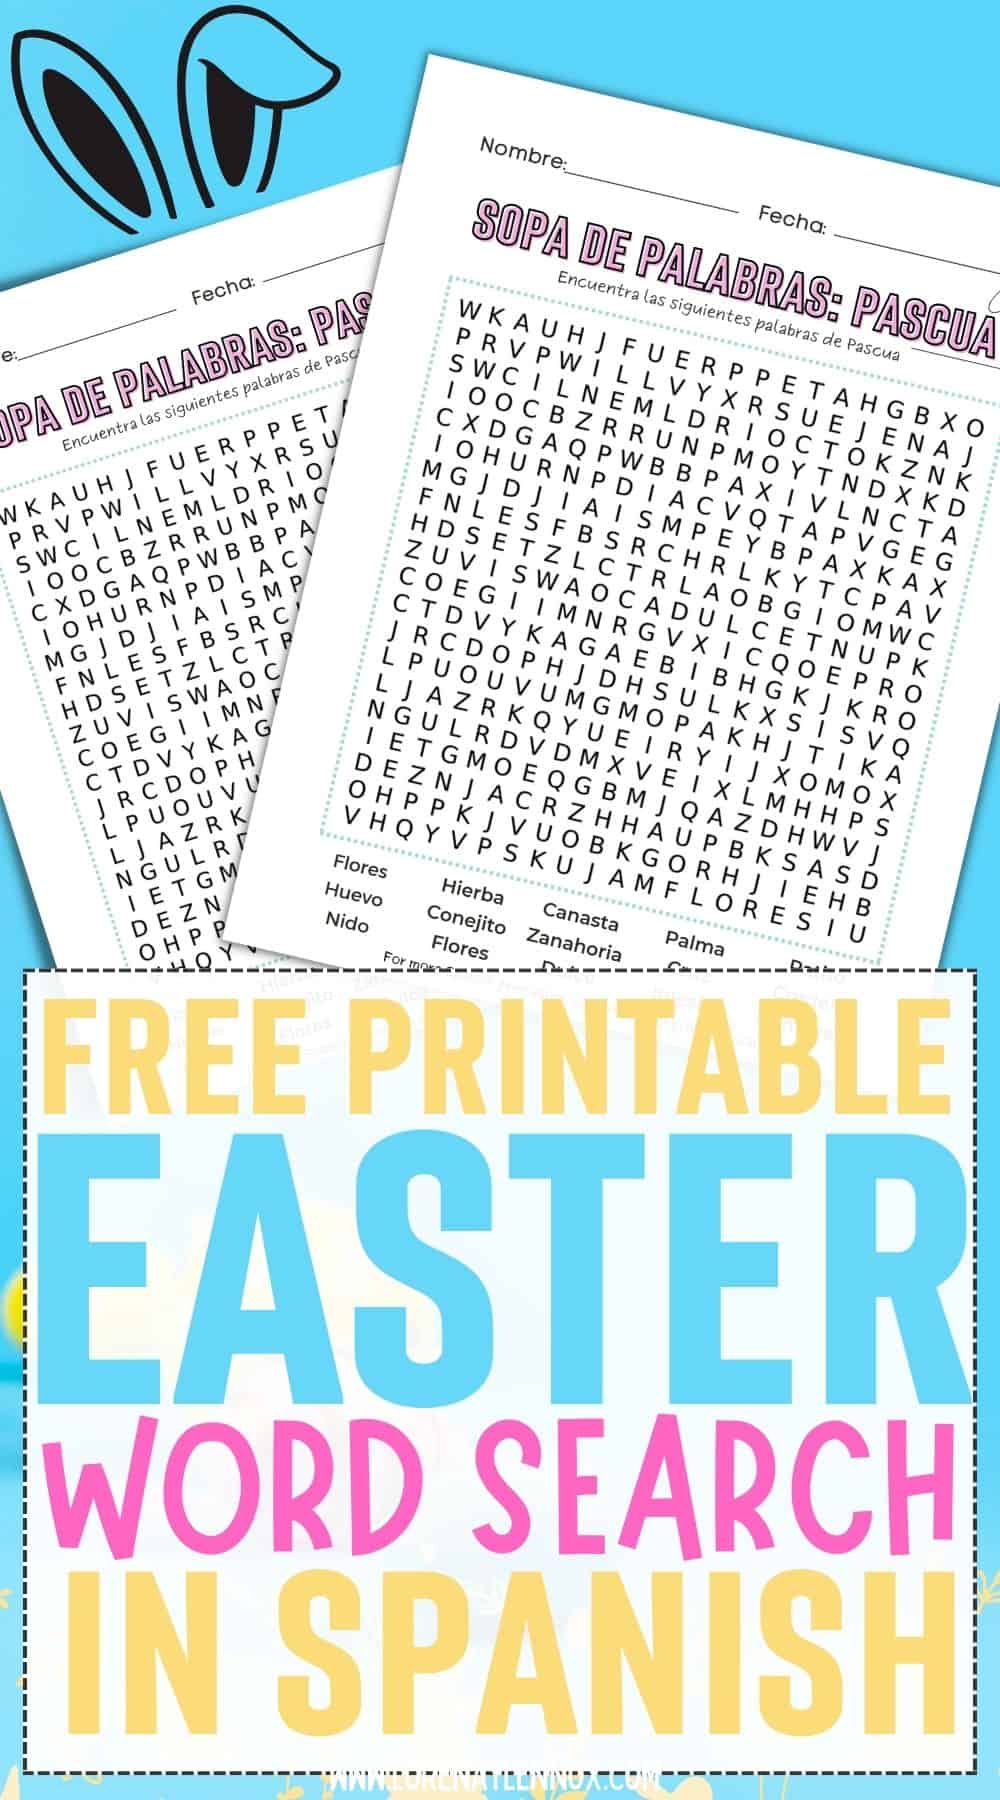 Easter Word Search Printable in Spanish [Free Printable]